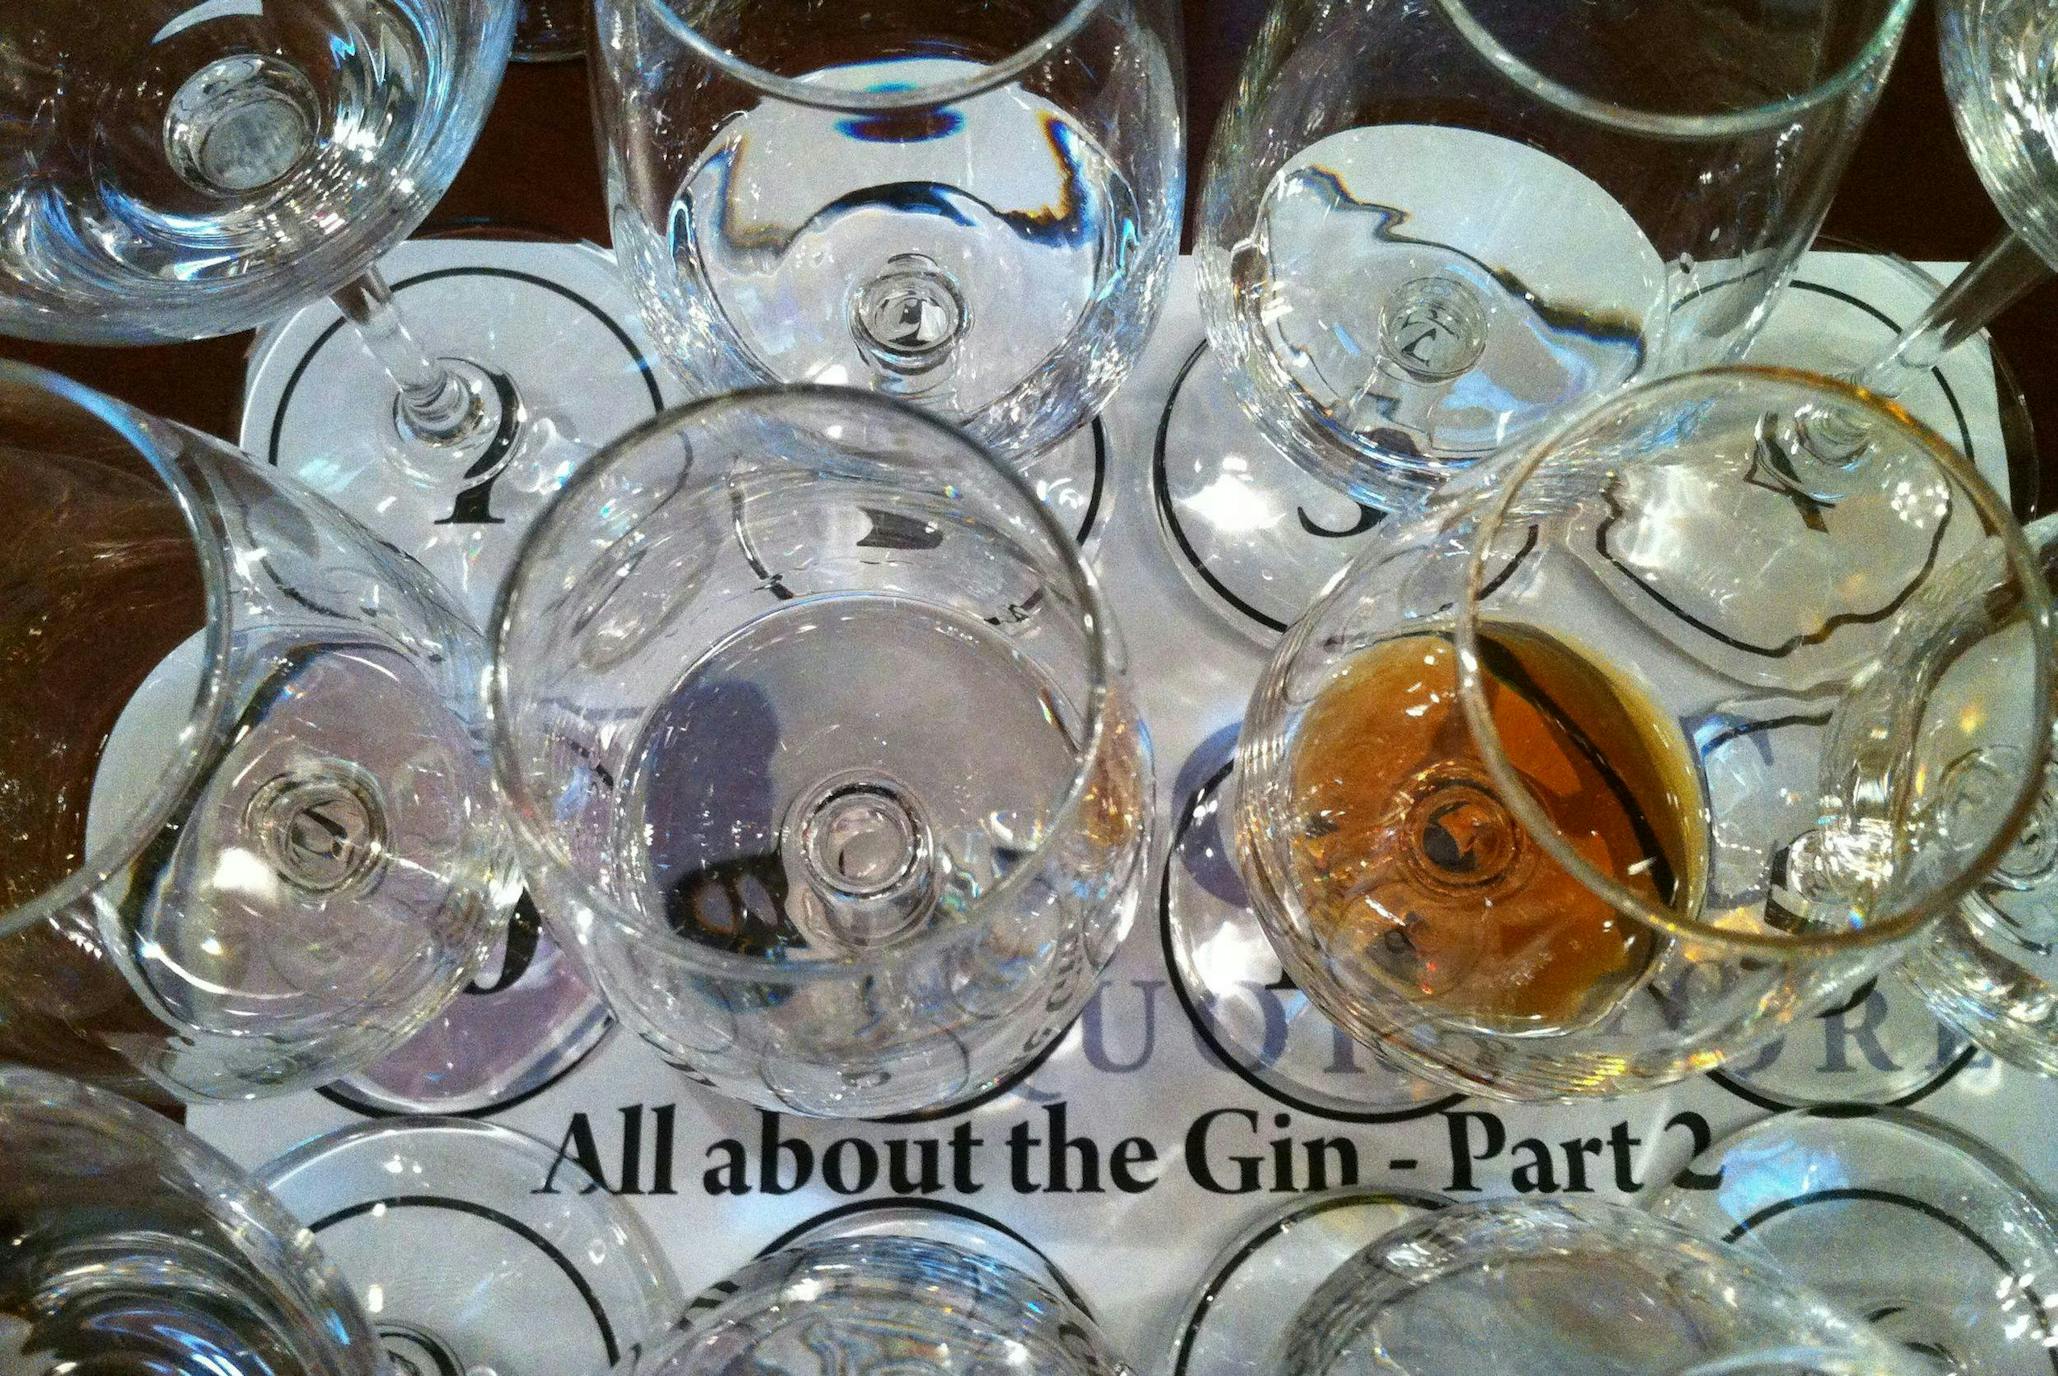 What it's like to taste 40 gins in one day